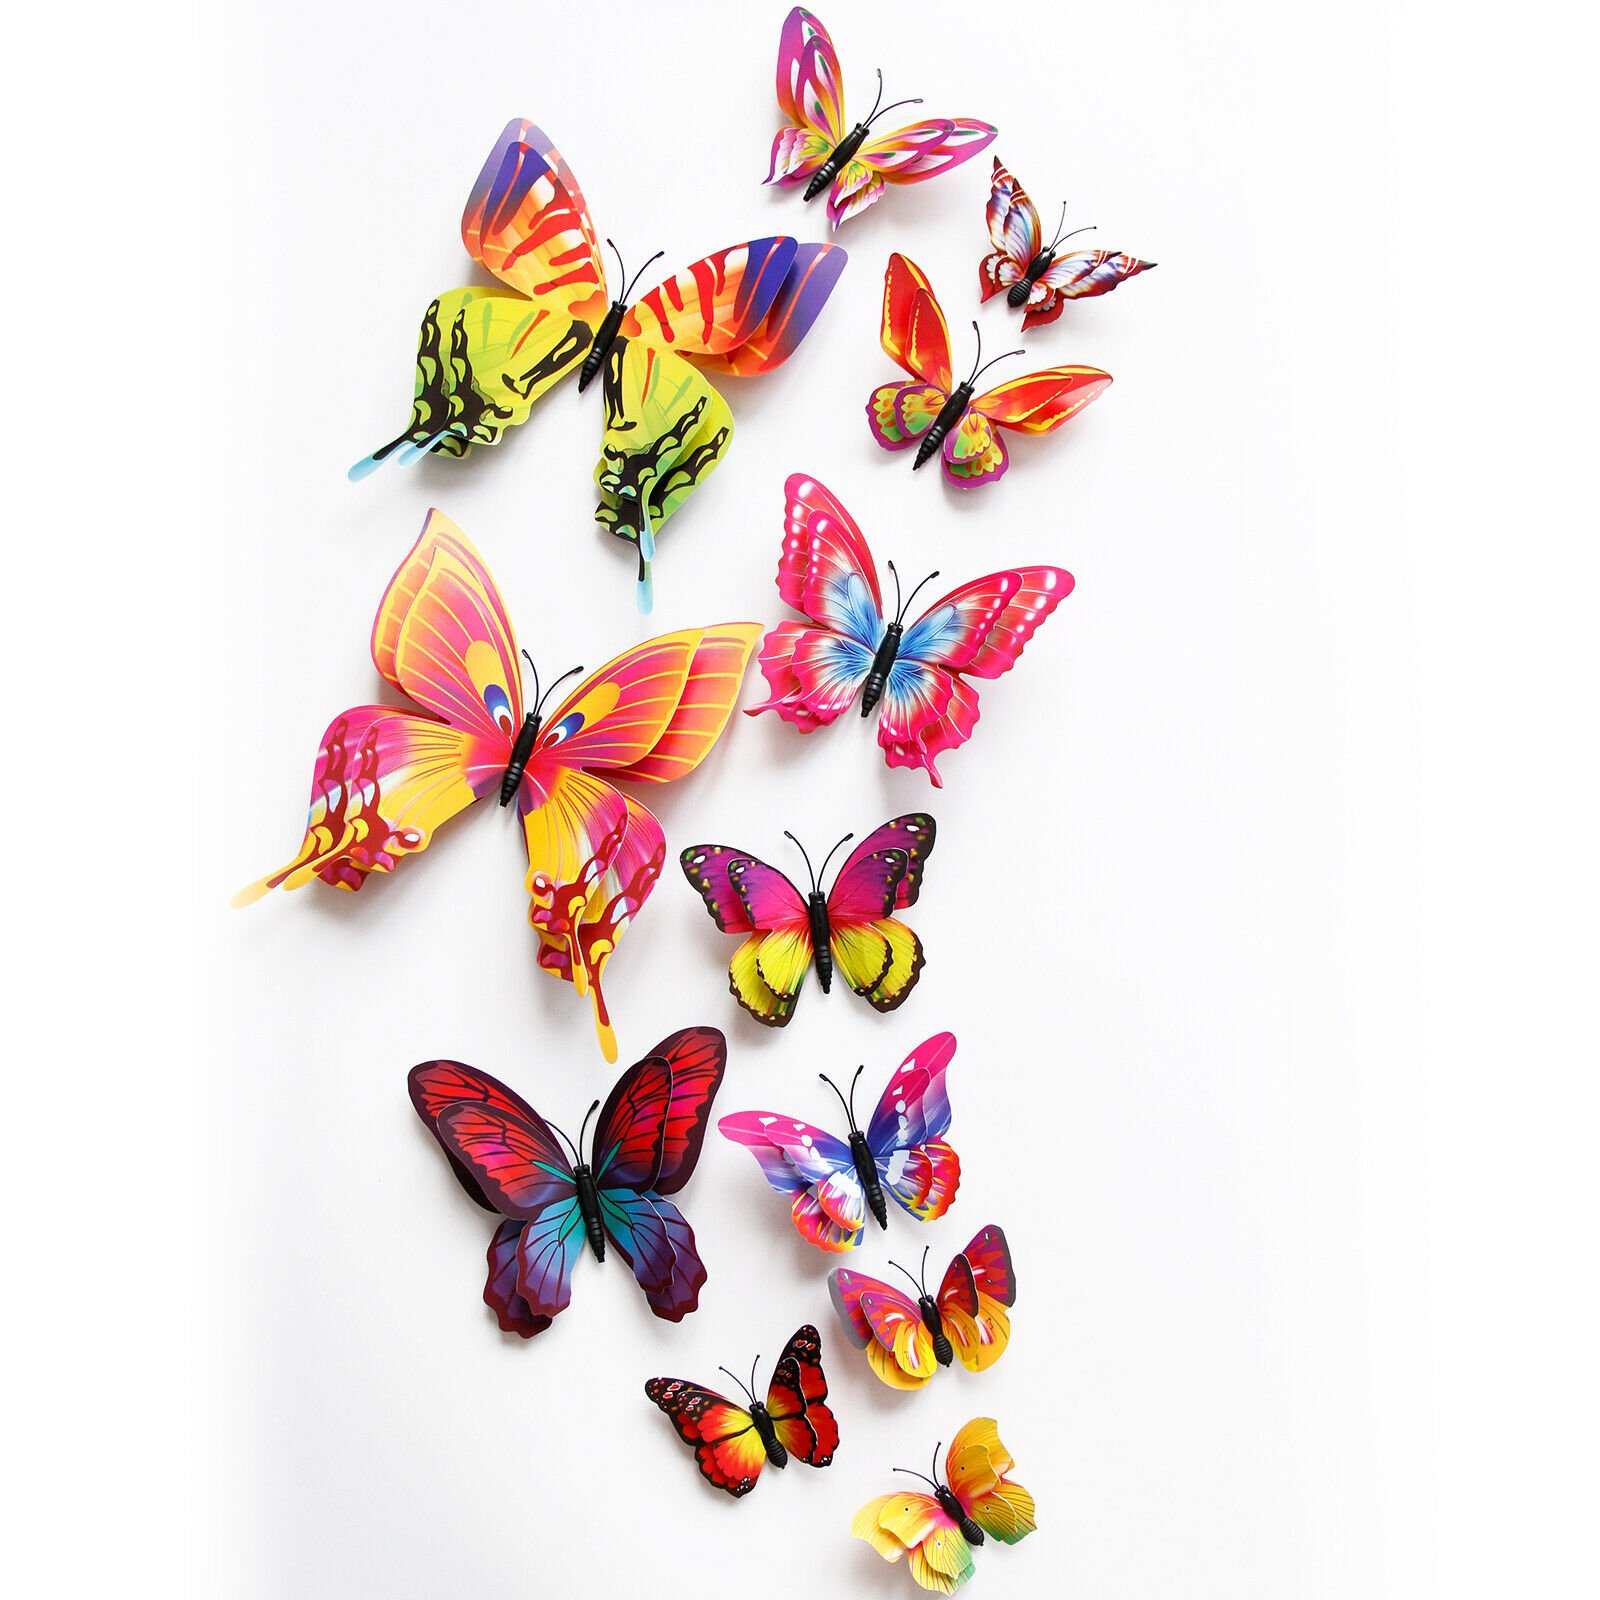 12 Pcs 3D Wall Sticker Butterflies PVC Decal For Childrens Room Decoration 